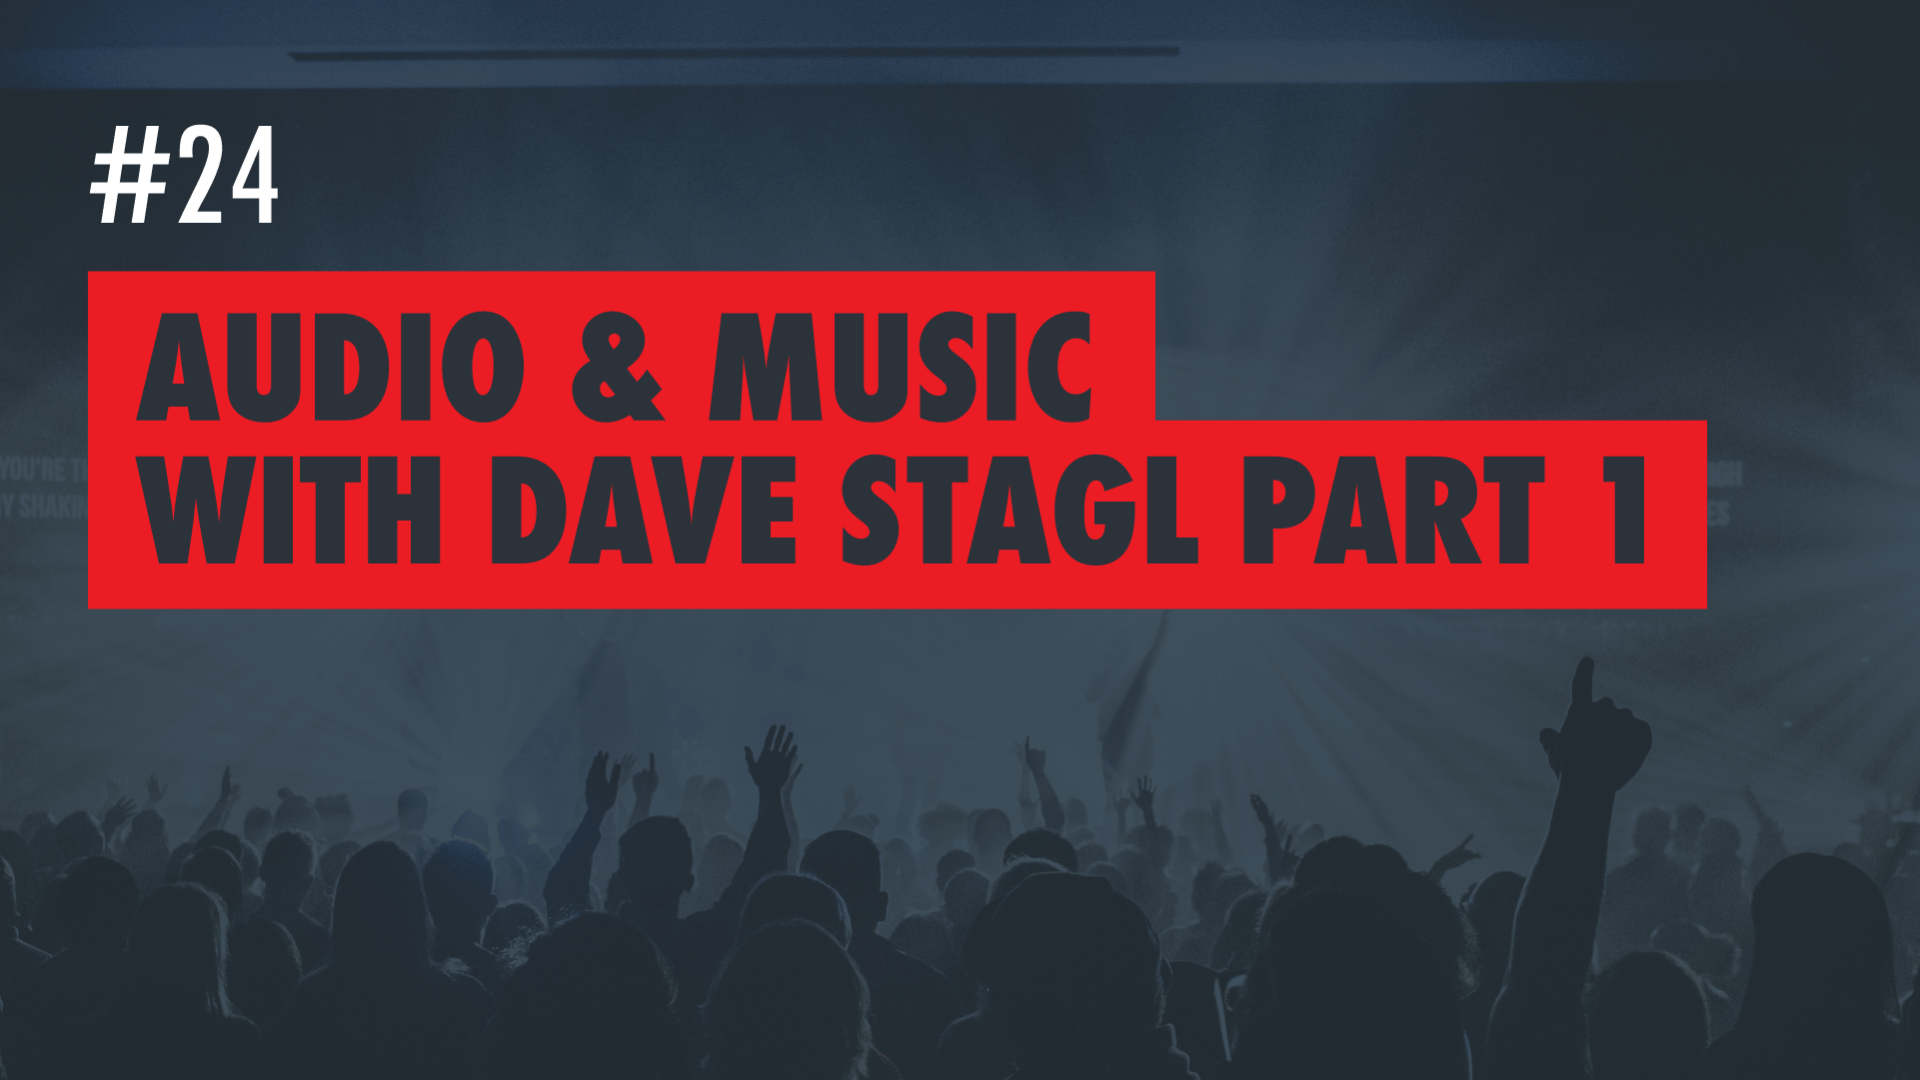 Audio & Music with Dave Stagl